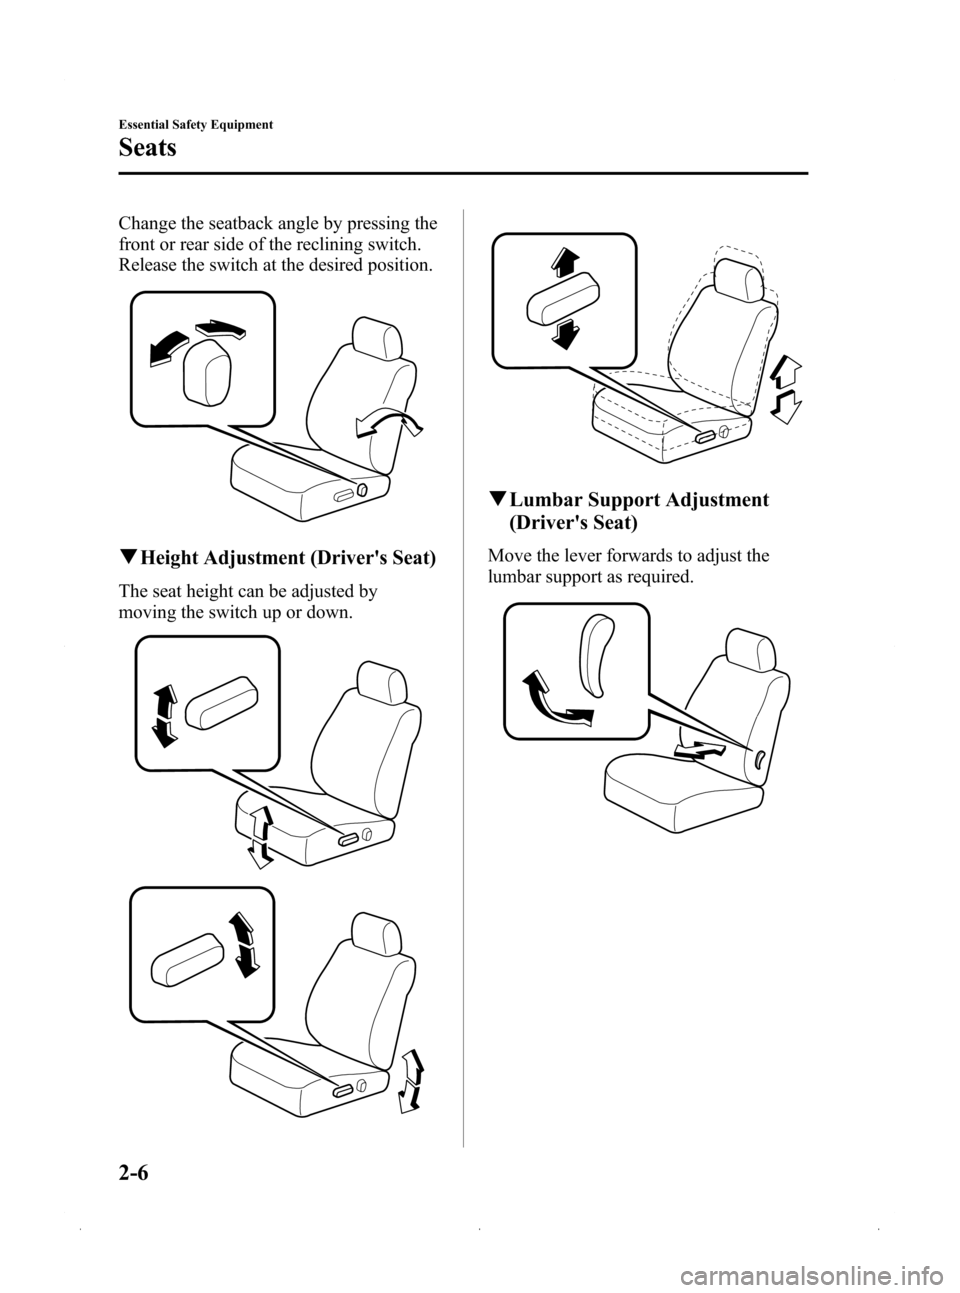 MAZDA MODEL 3 HATCHBACK 2009   (in English) User Guide Black plate (20,1)
Change the seatback angle by pressing the
front or rear side of the reclining switch.
Release the switch at the desired position.
qHeight Adjustment (Drivers Seat)
The seat height 